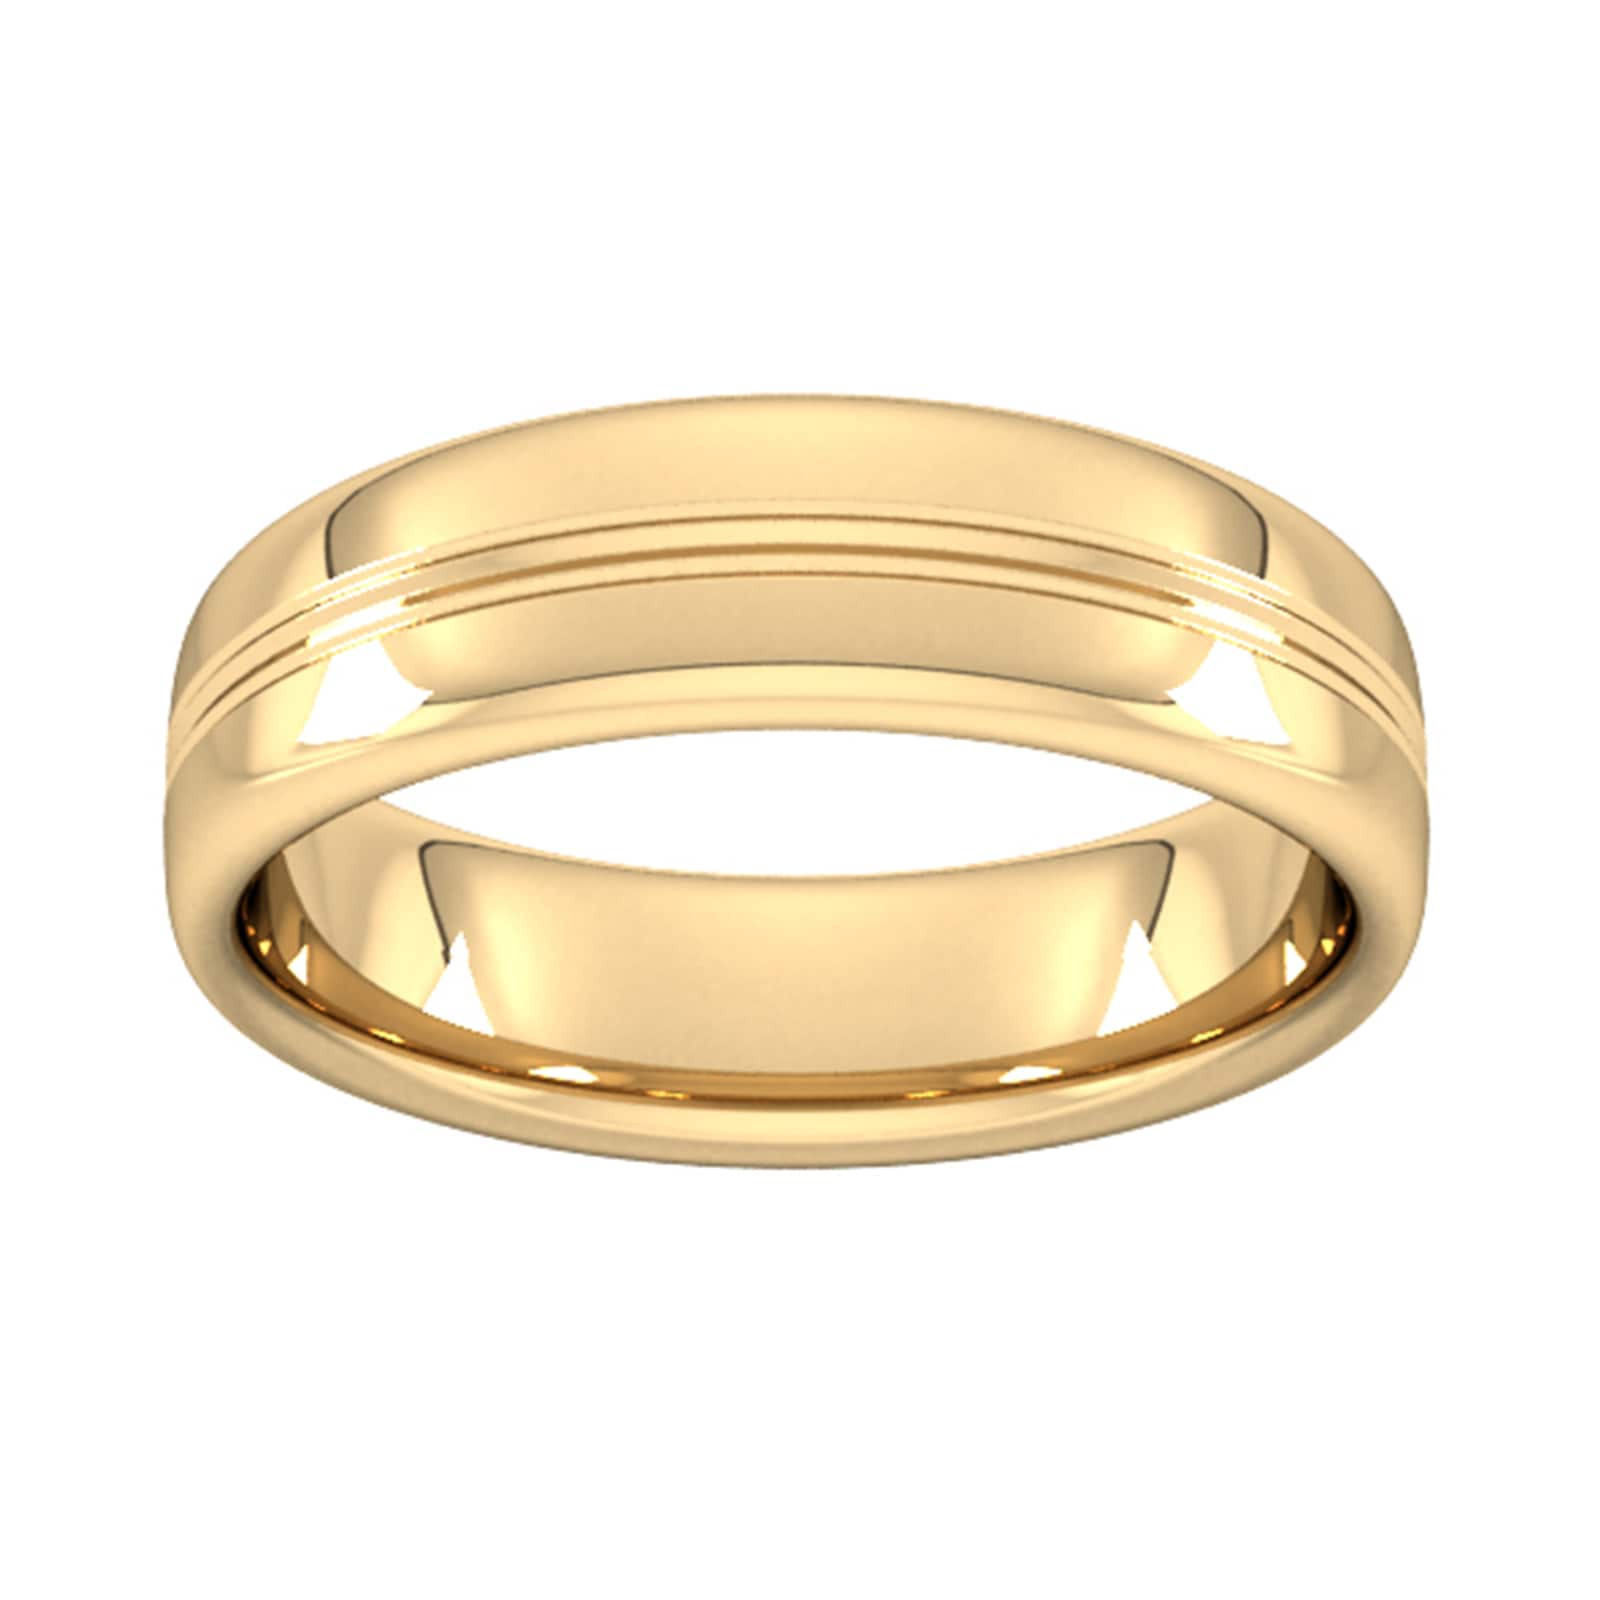 6mm Slight Court Standard Grooved Polished Finish Wedding Ring In 9 Carat Yellow Gold - Ring Size I